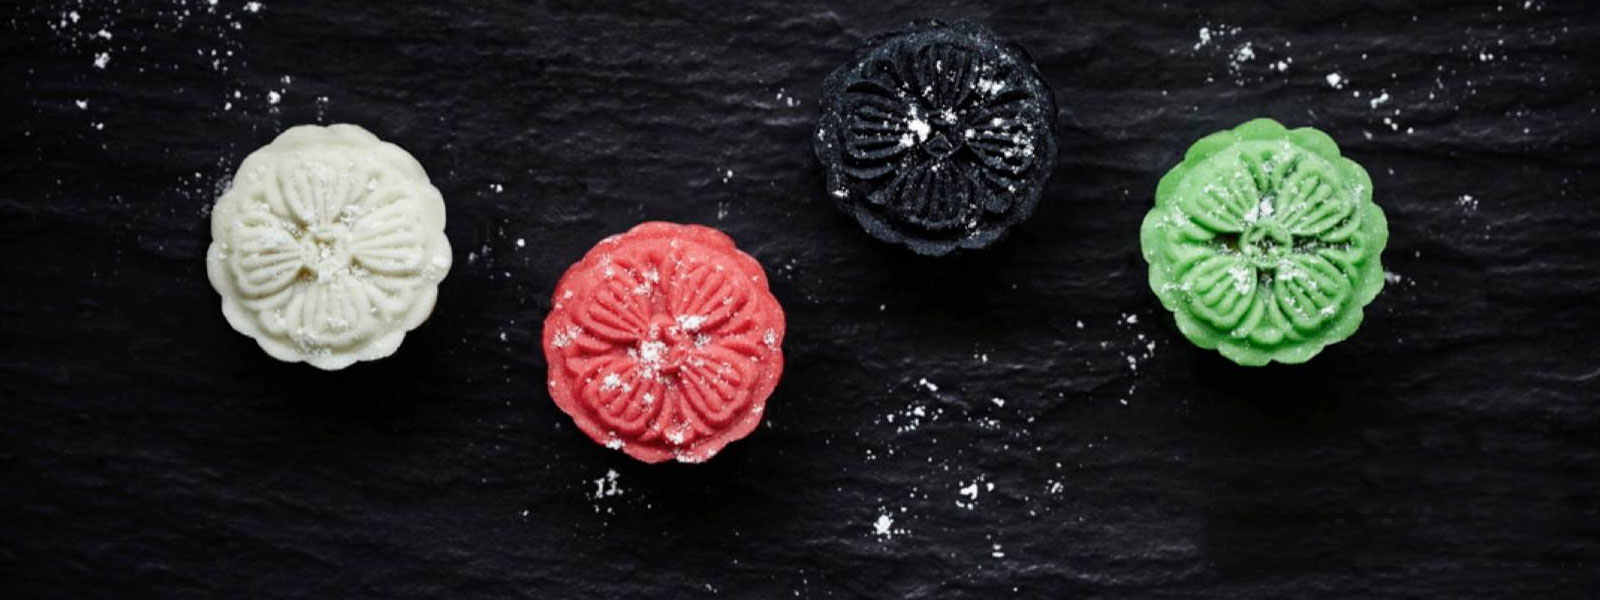 Snowskin mooncakes from Smoulder, Singapore